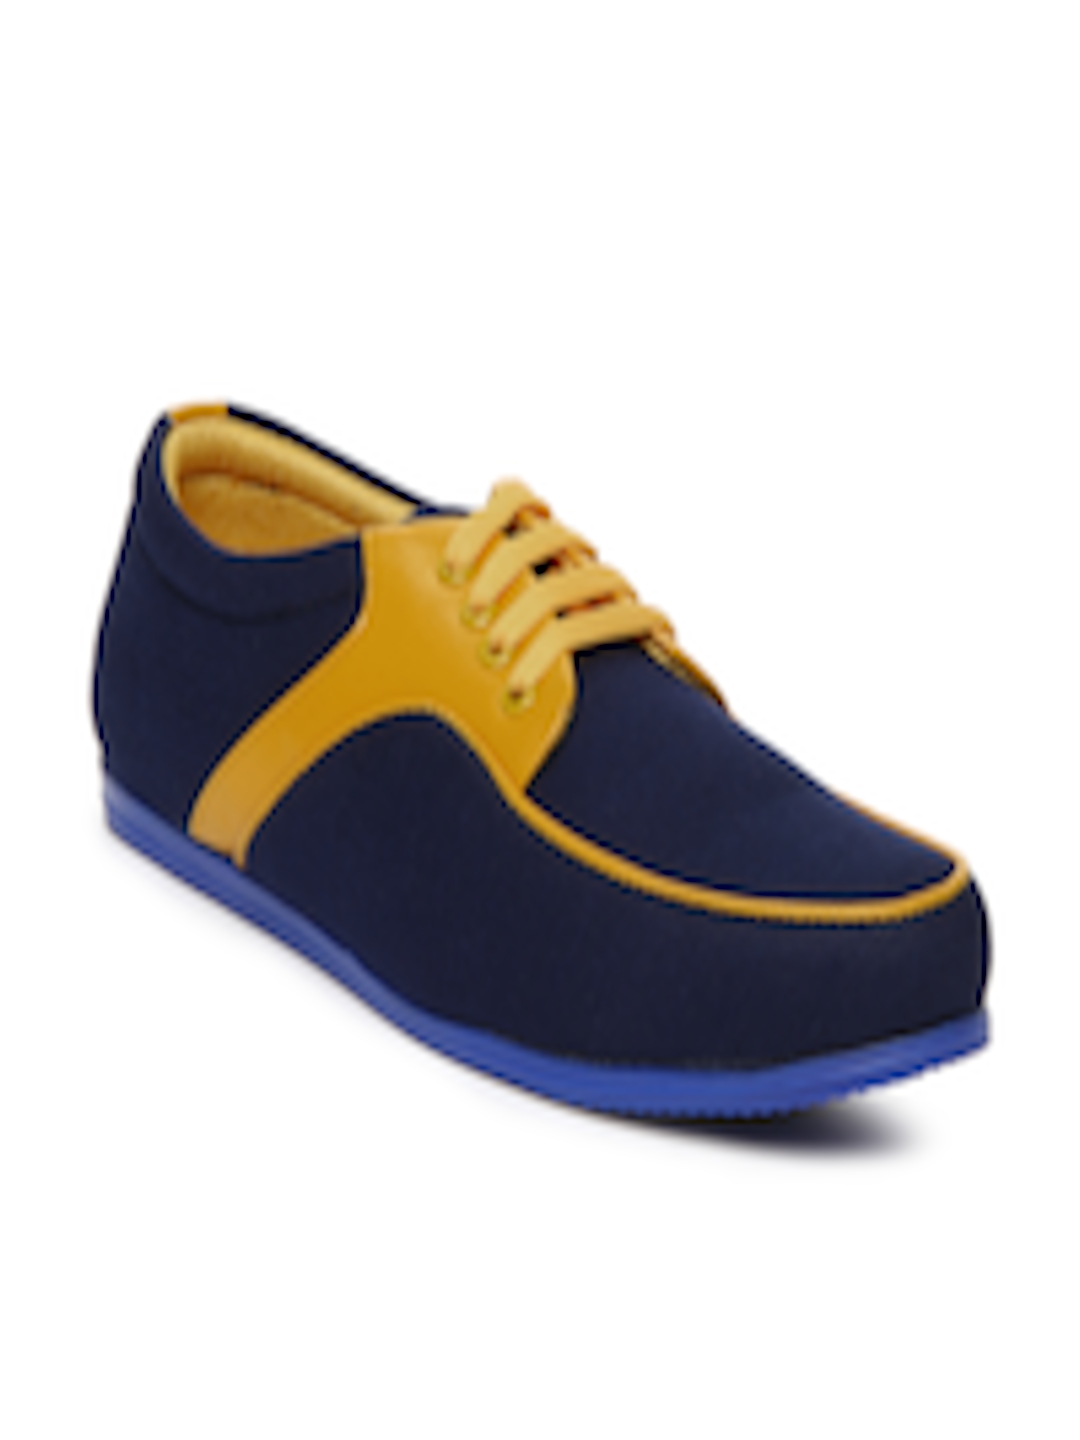 Buy Series Men Navy Blue Casual Shoes - Casual Shoes for Men 317372 ...